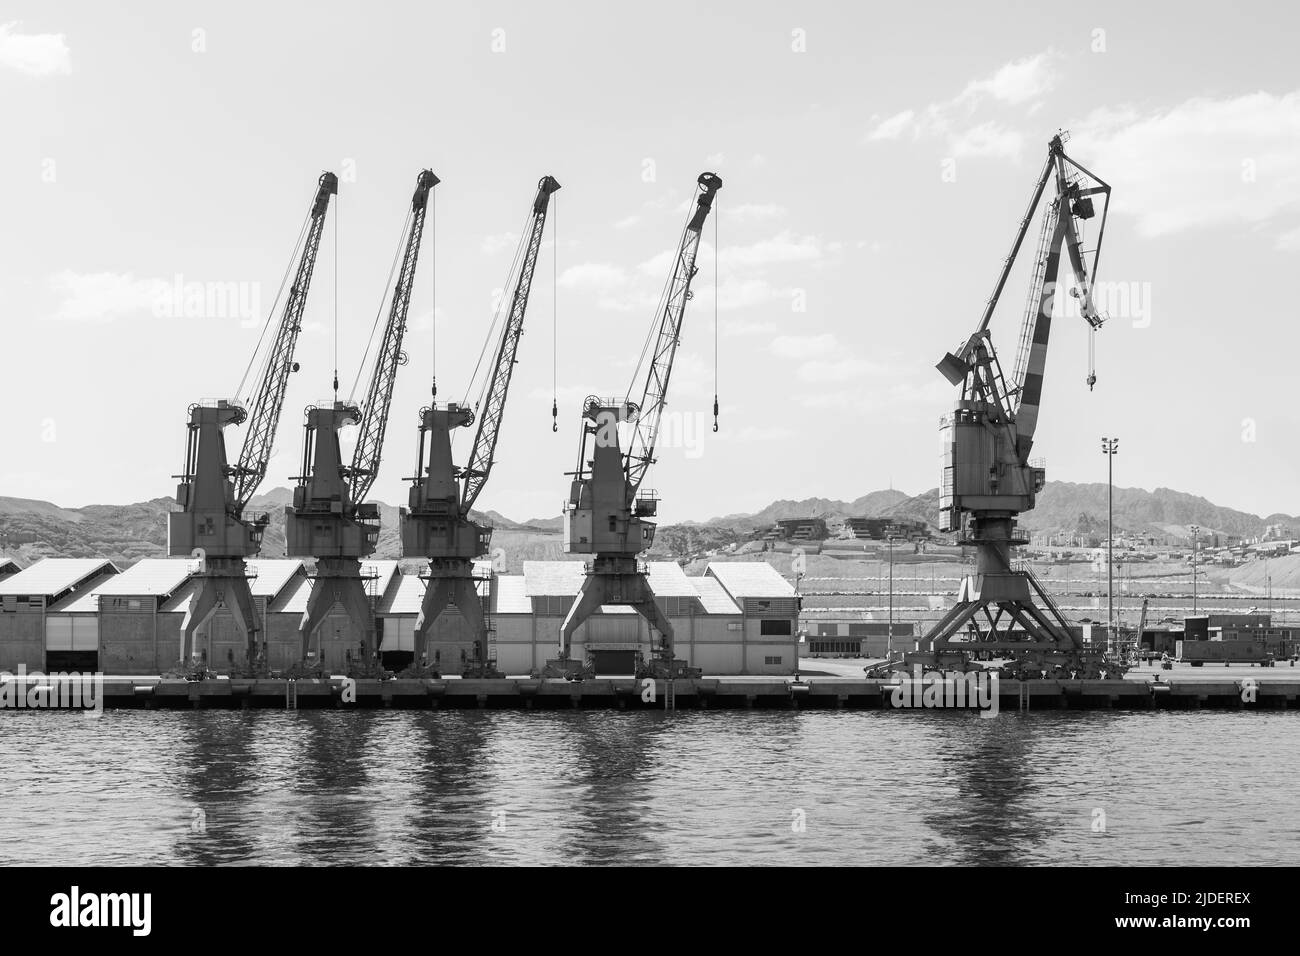 Eilat, Israel - May 22, 2009: Port cranes in cargo port in Eilat. Black and white photography Stock Photo